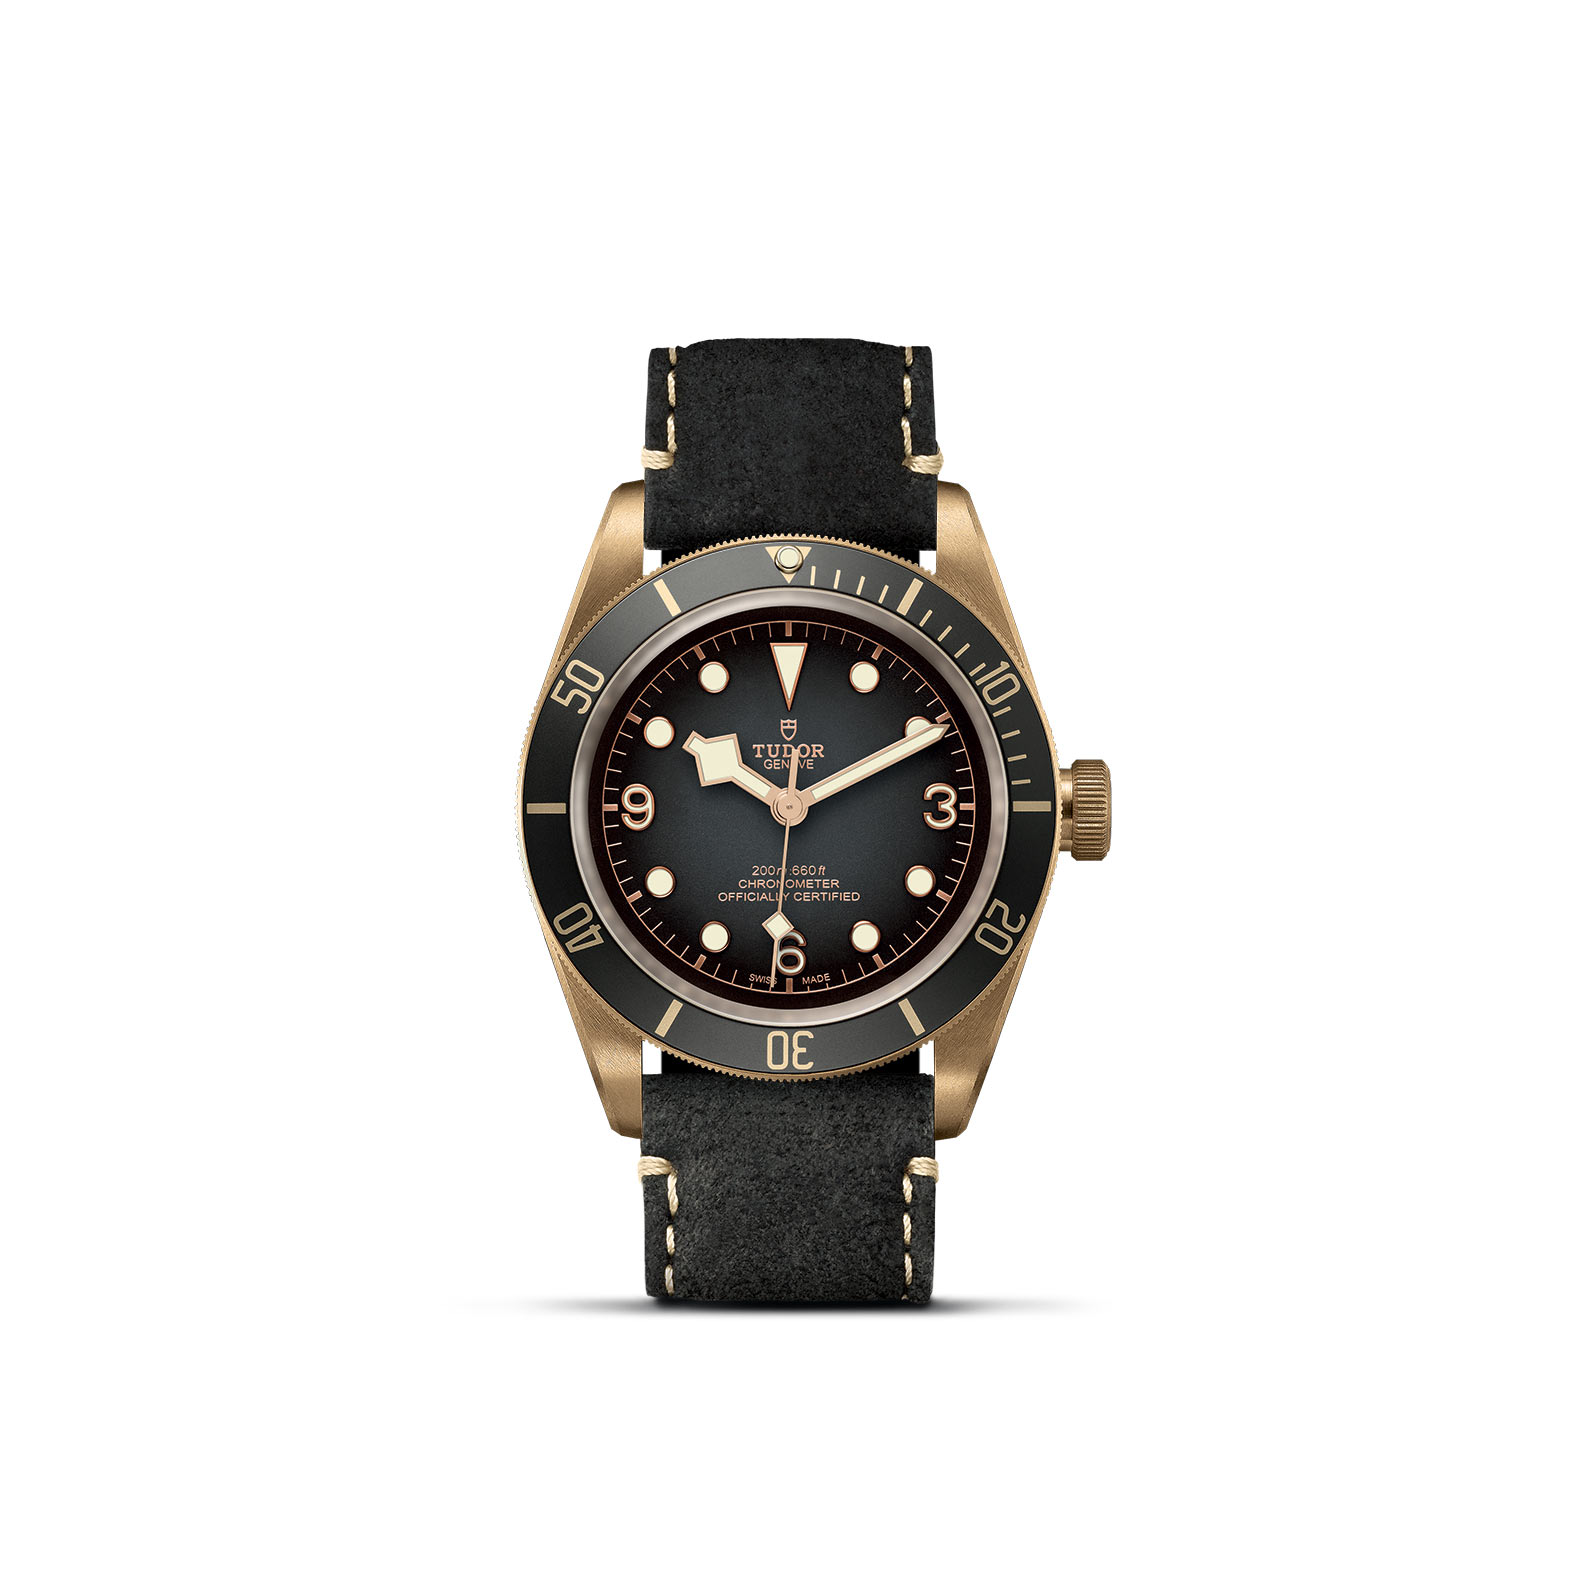 TUDOR BLACK BAY BRONZE standing upright, highlighting its classic design against a white background.